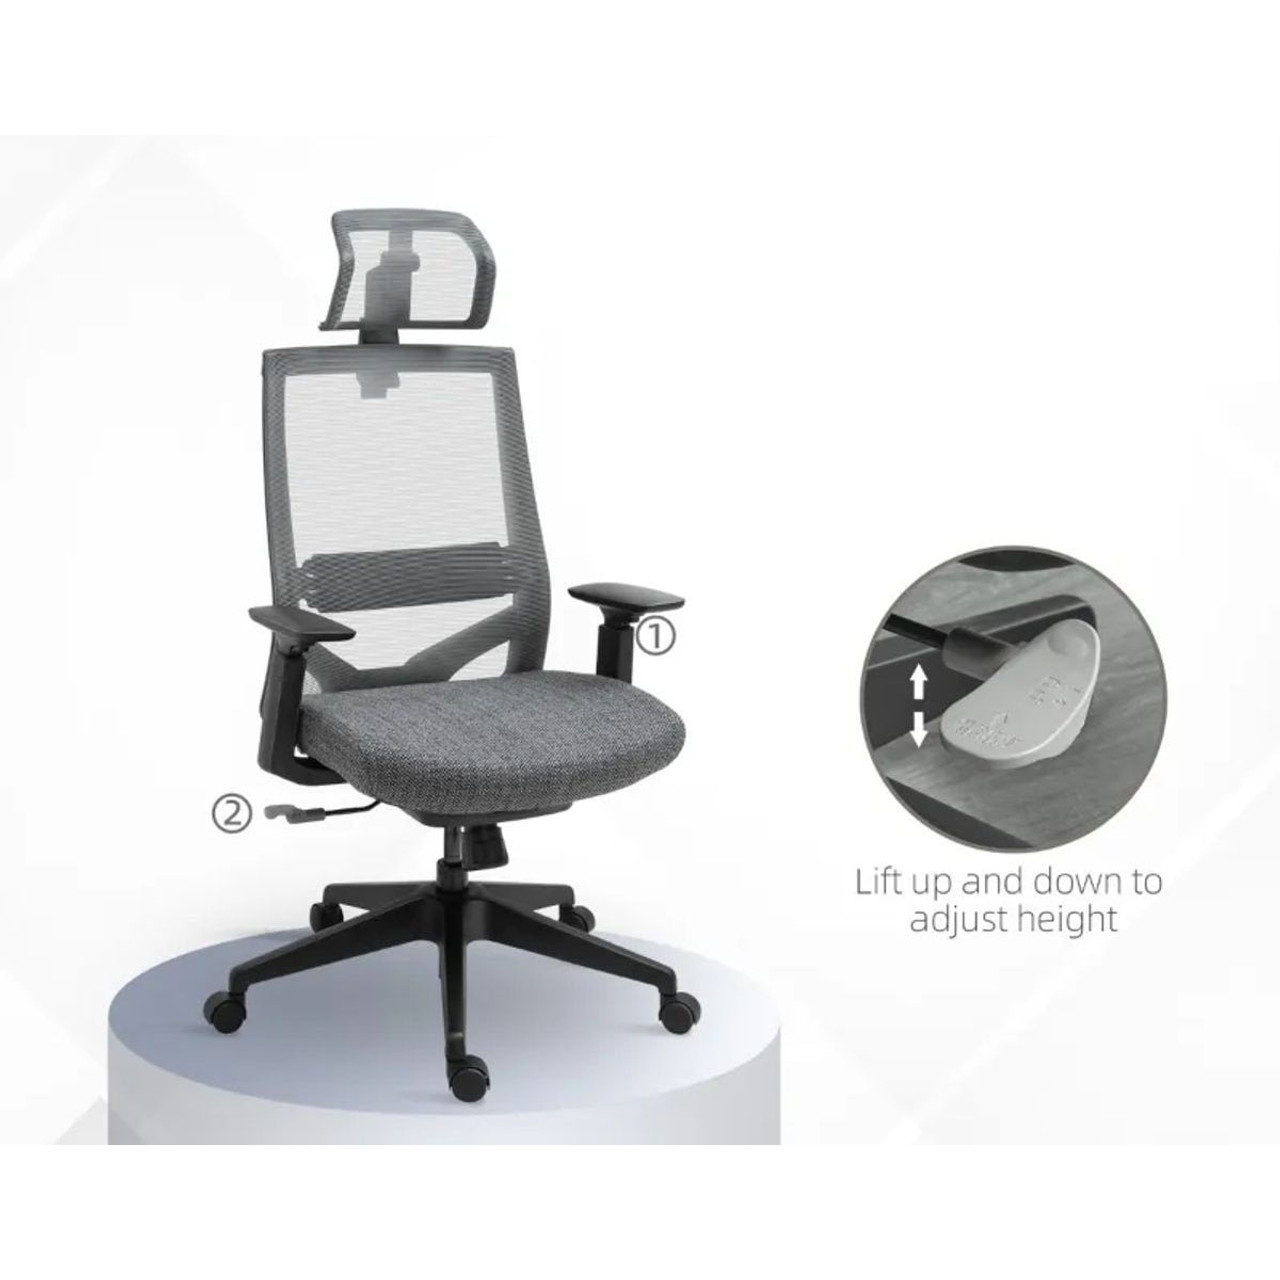 Vinsetto™ High-Back Mesh Office Chair product image